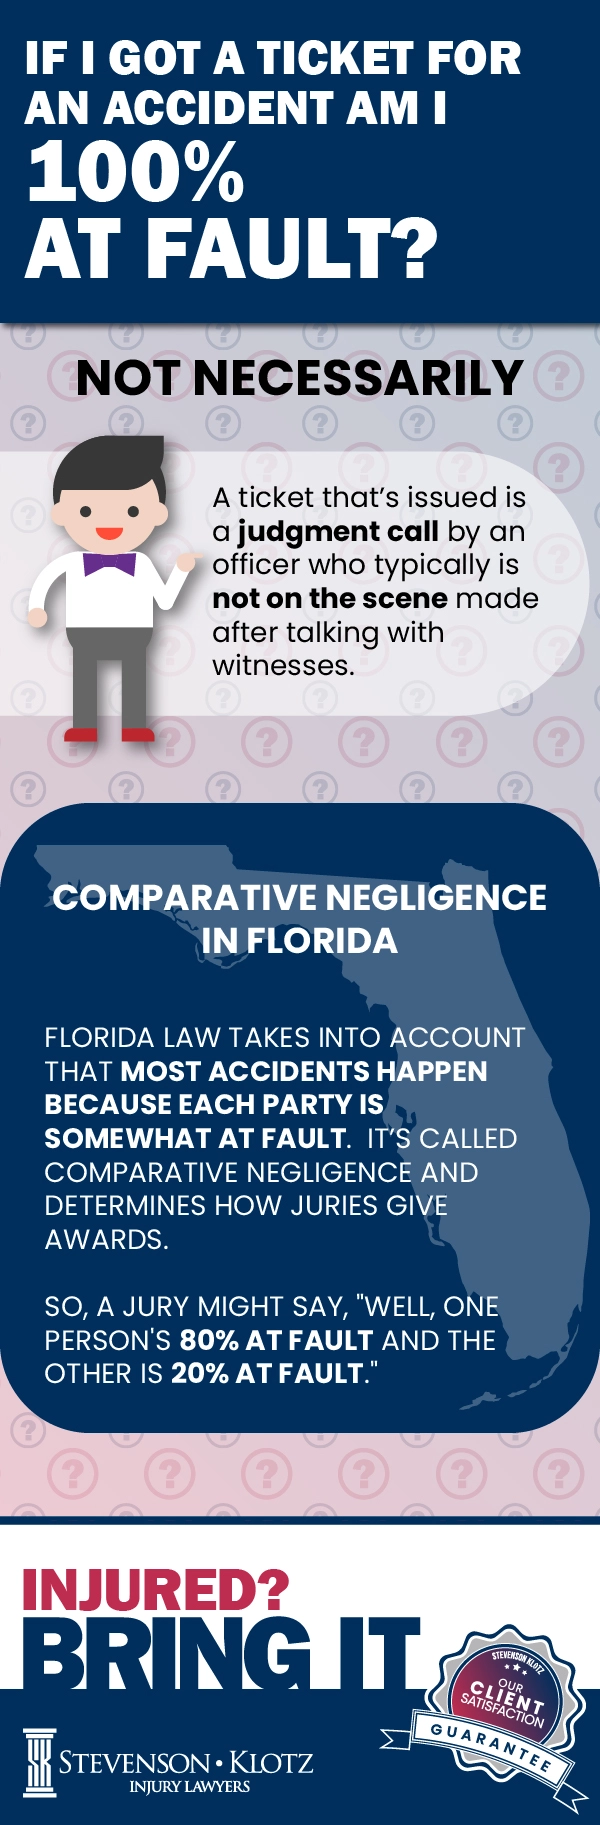 I Got a Ticket for an Accident am I at Fault Infographic